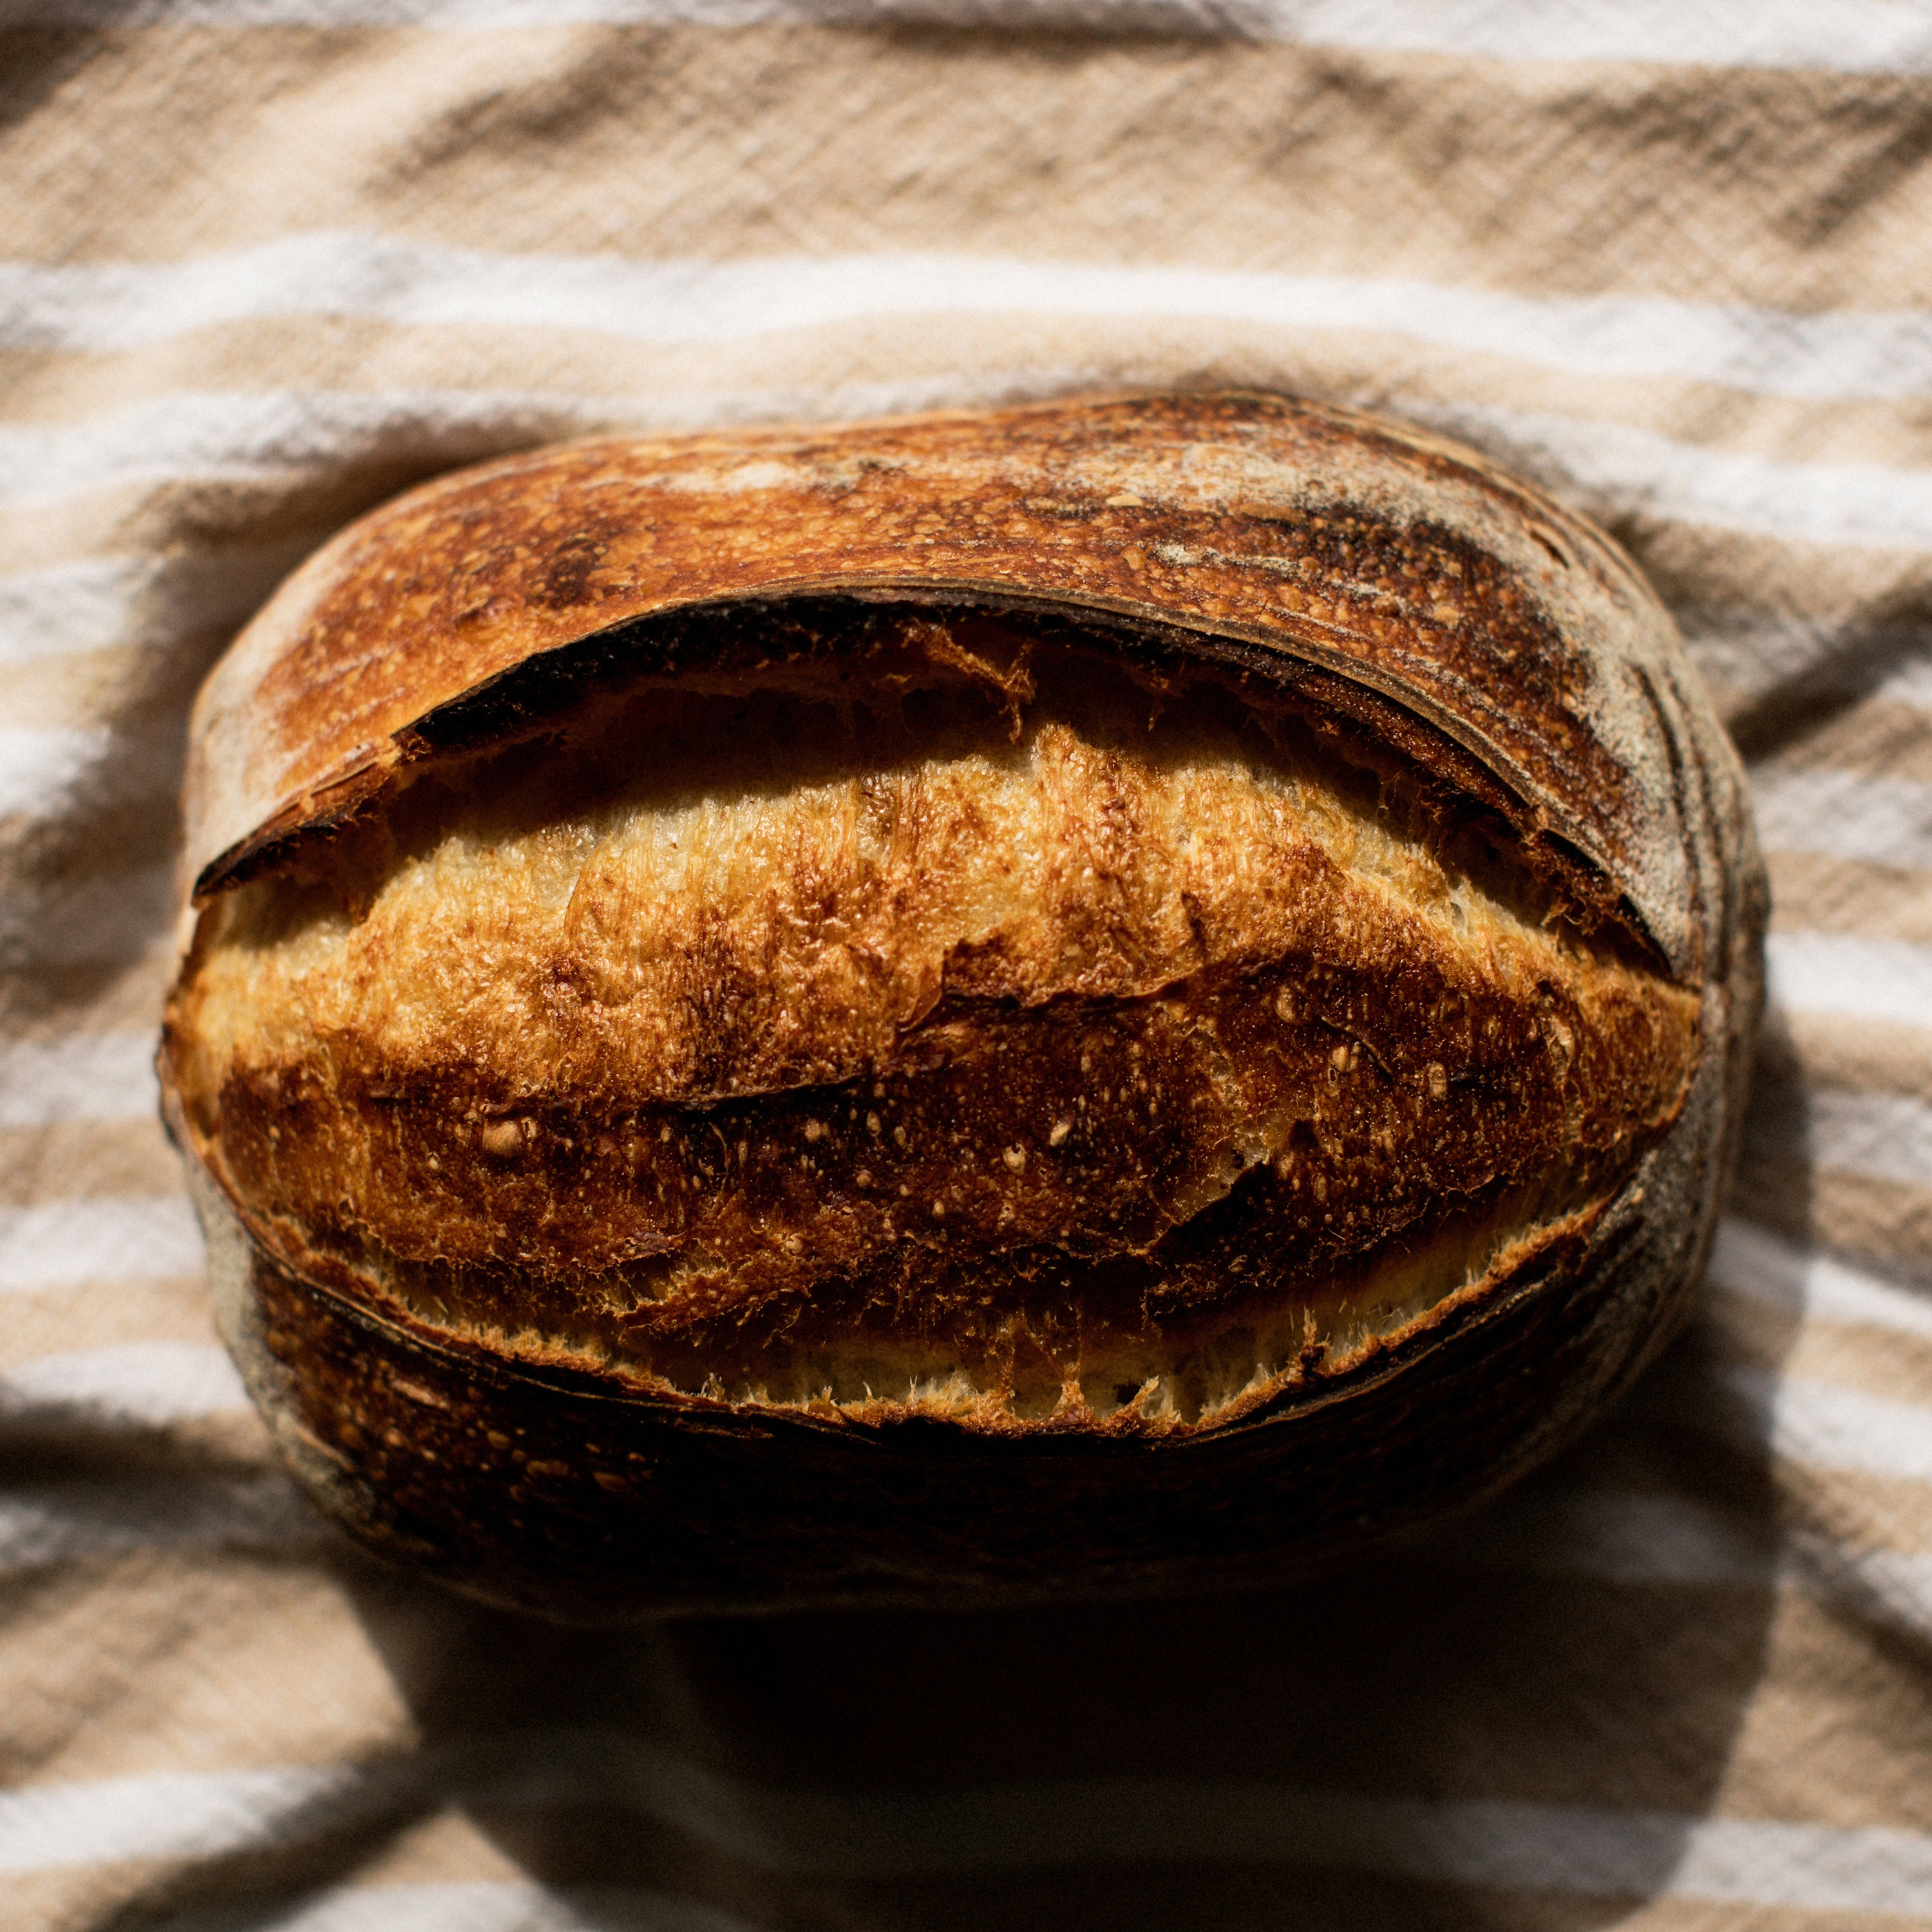 How to Make Sourdough Bread at Home - West of the Loop